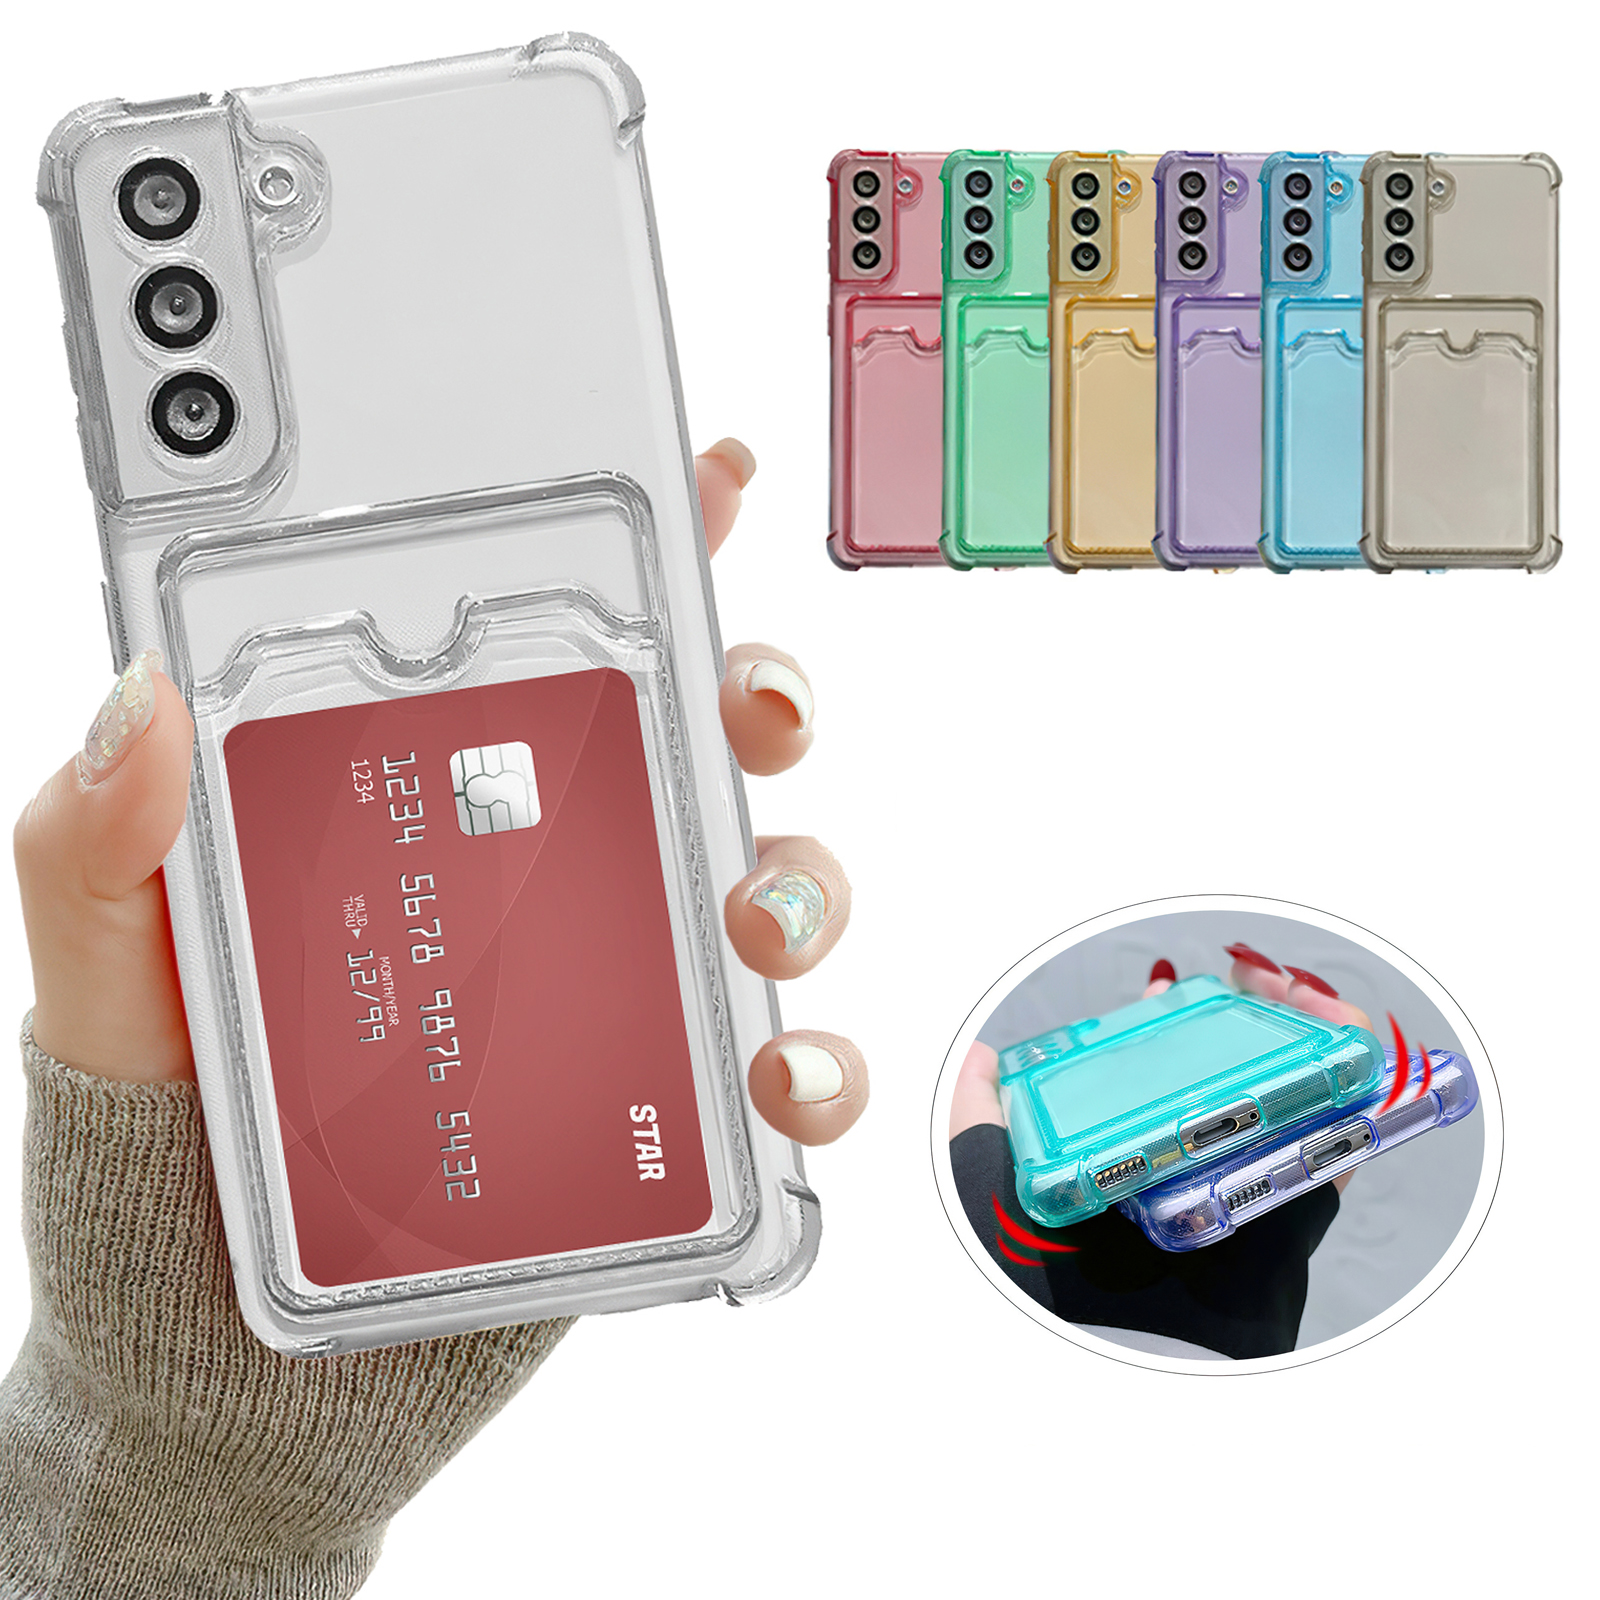 Samsung Galaxy S21 - Card Case Protection Transparent